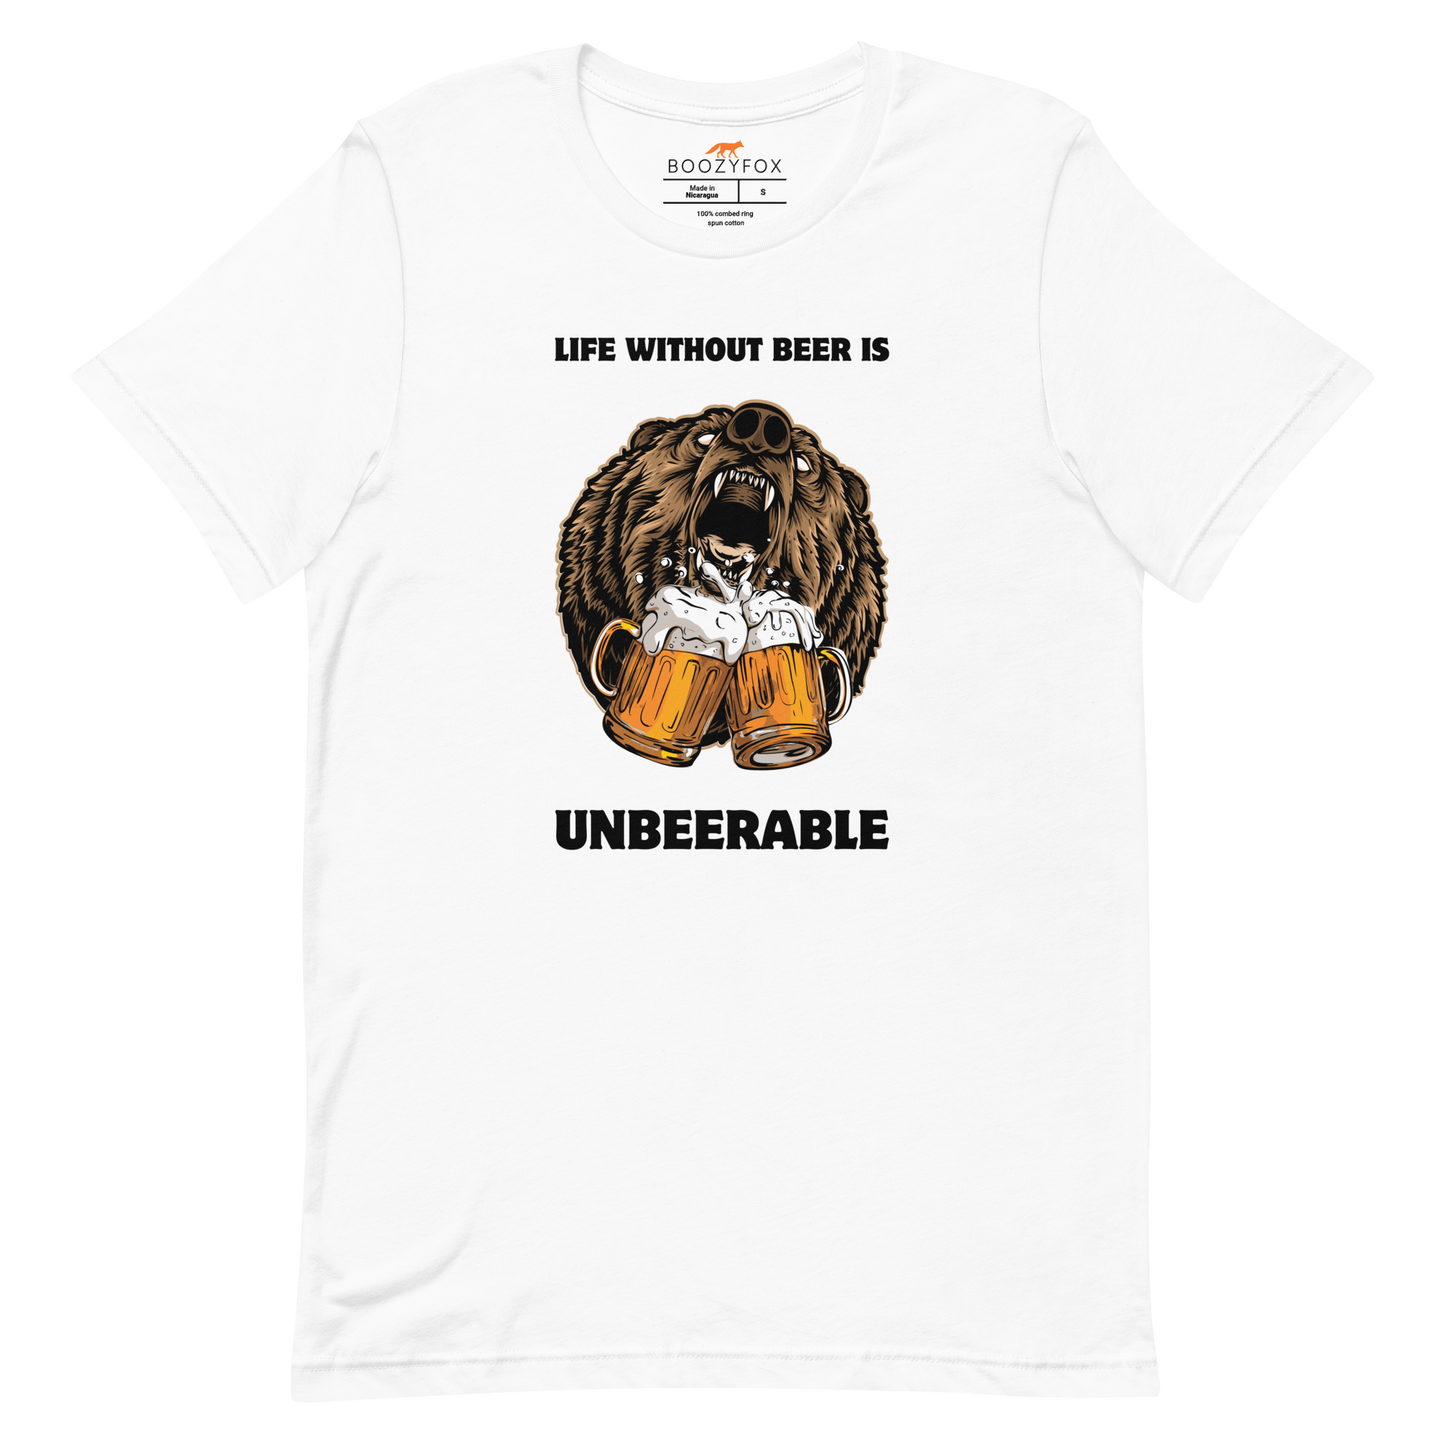 White Premium Bear Tee featuring a Life Without Beer Is Unbeerable graphic design on the chest - Funny Graphic Bear Tees - Boozy Fox